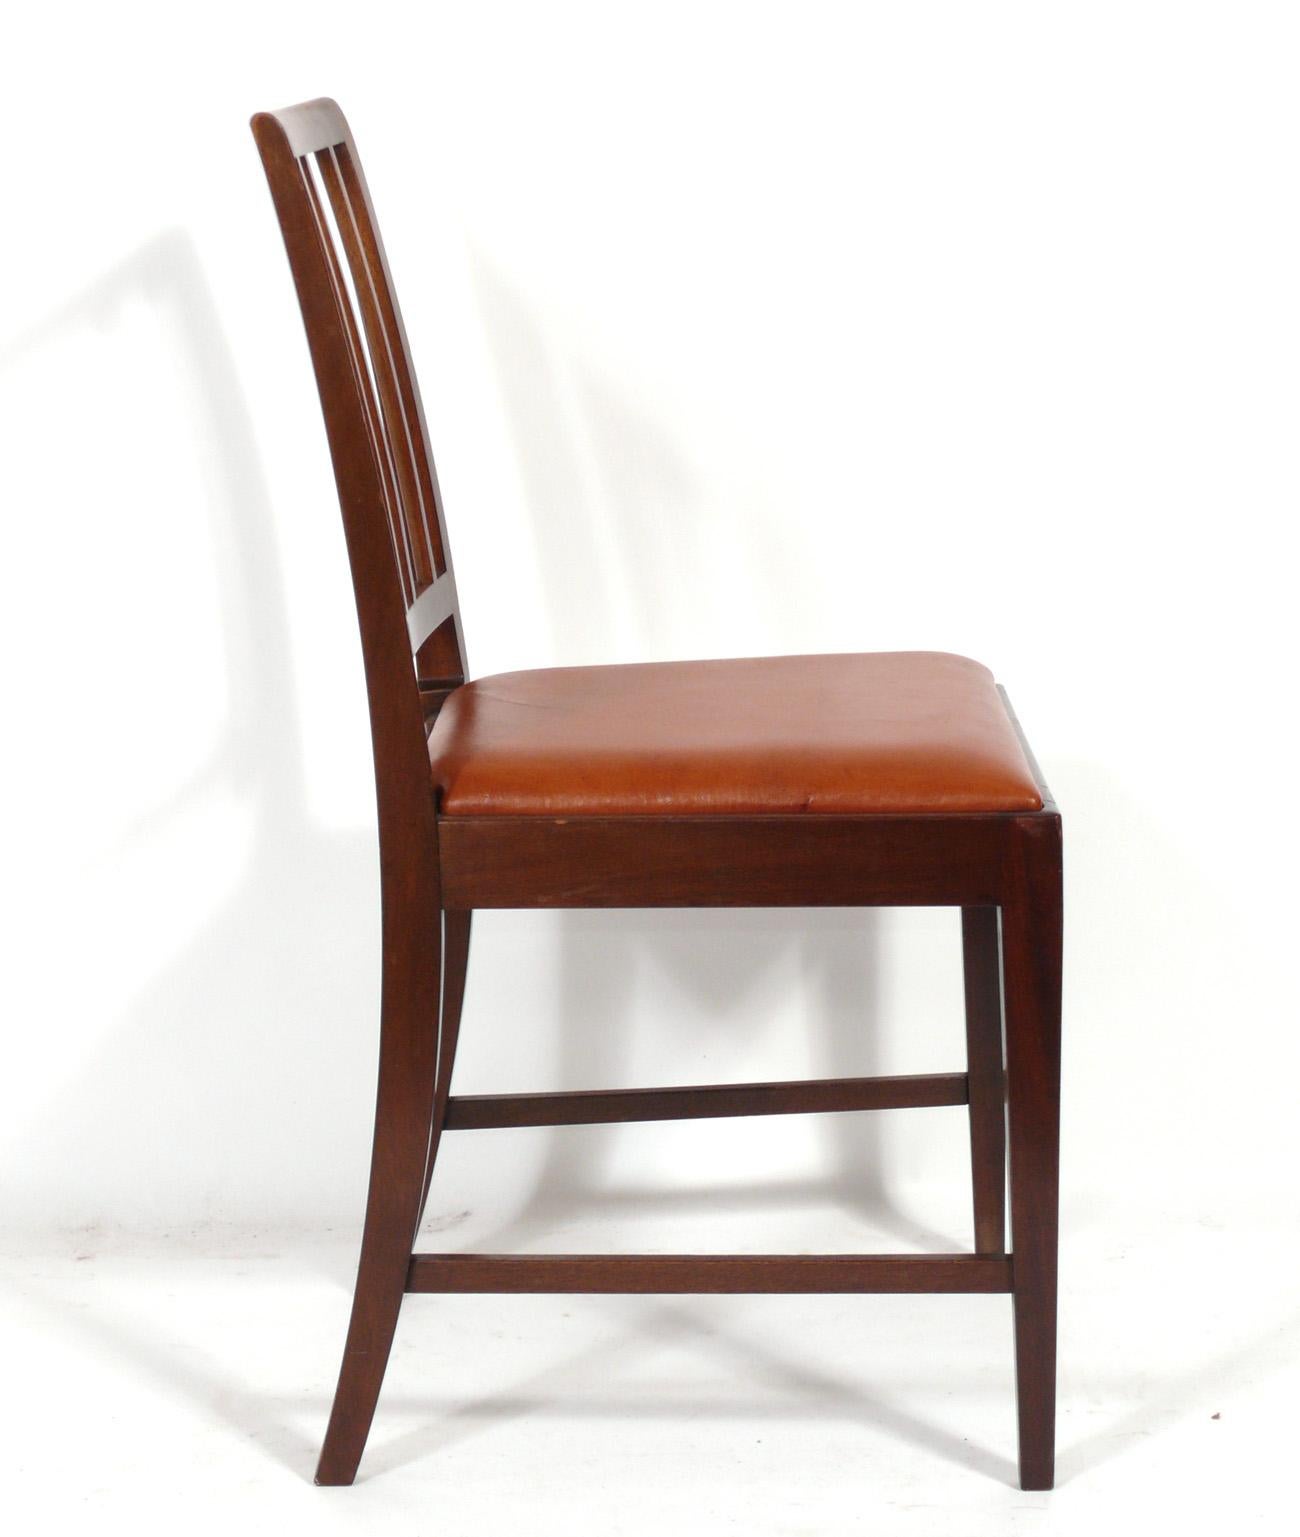 Frits Henningsen Danish Modern Dining Chairs, circa 1930s In Good Condition For Sale In Atlanta, GA